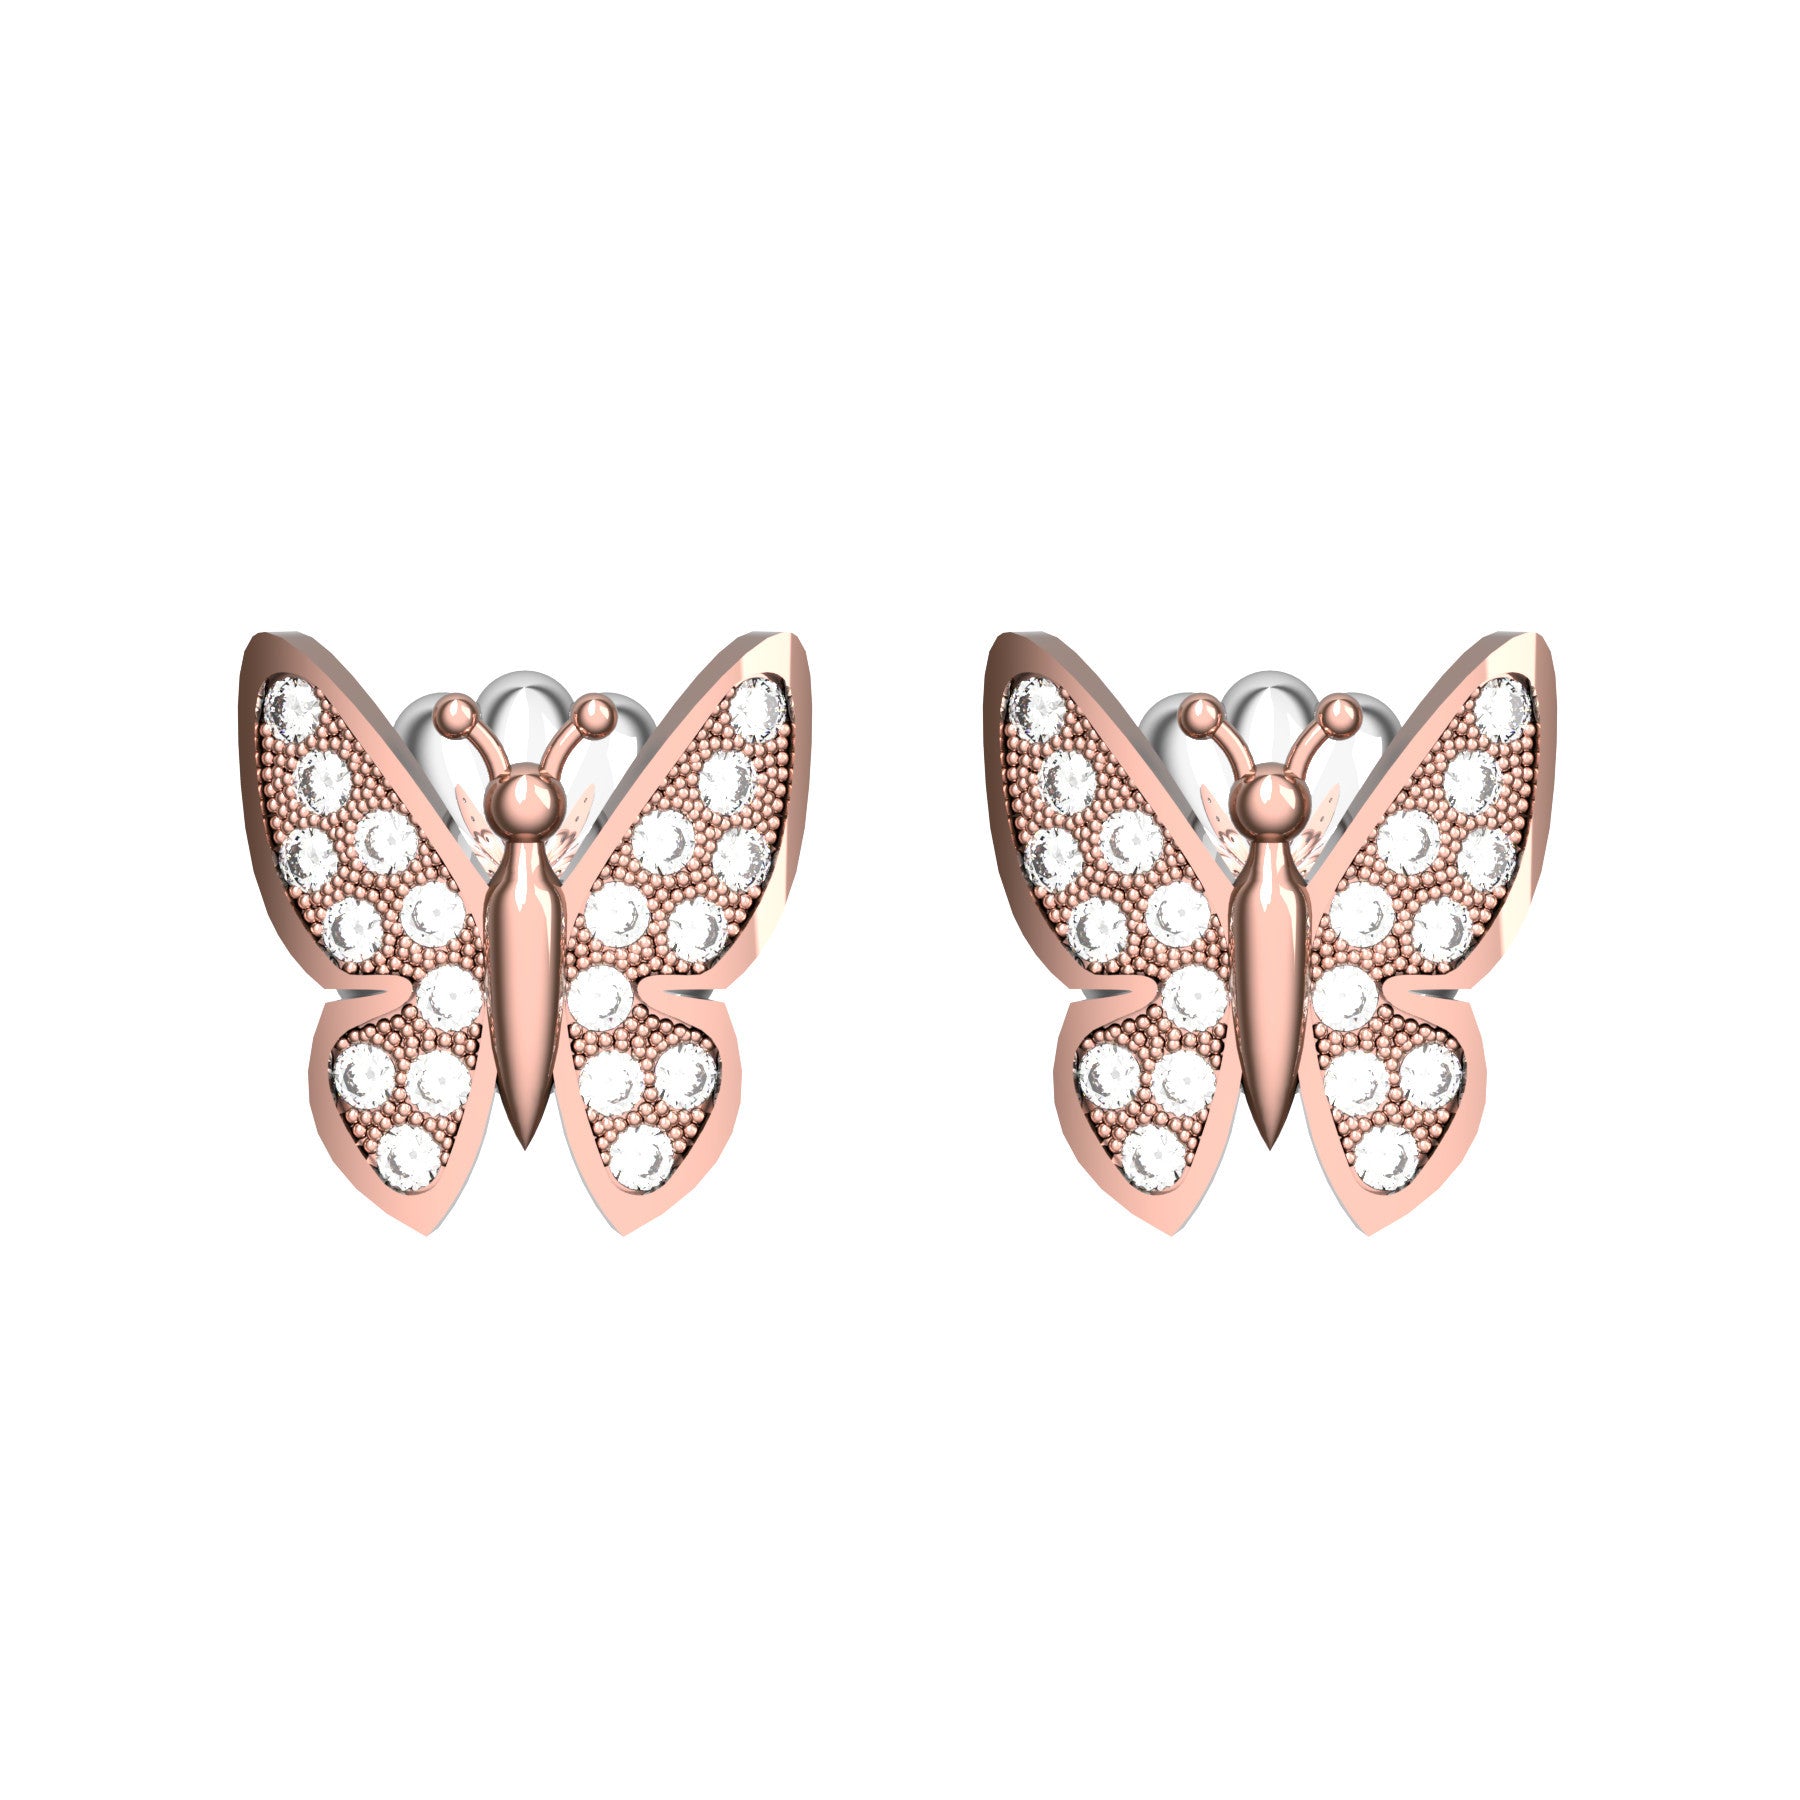 butterfly earrings, natural round diamonds, 18 K pink gold, weight about 2,4 g (0.08 oz), size 10x9 mm 